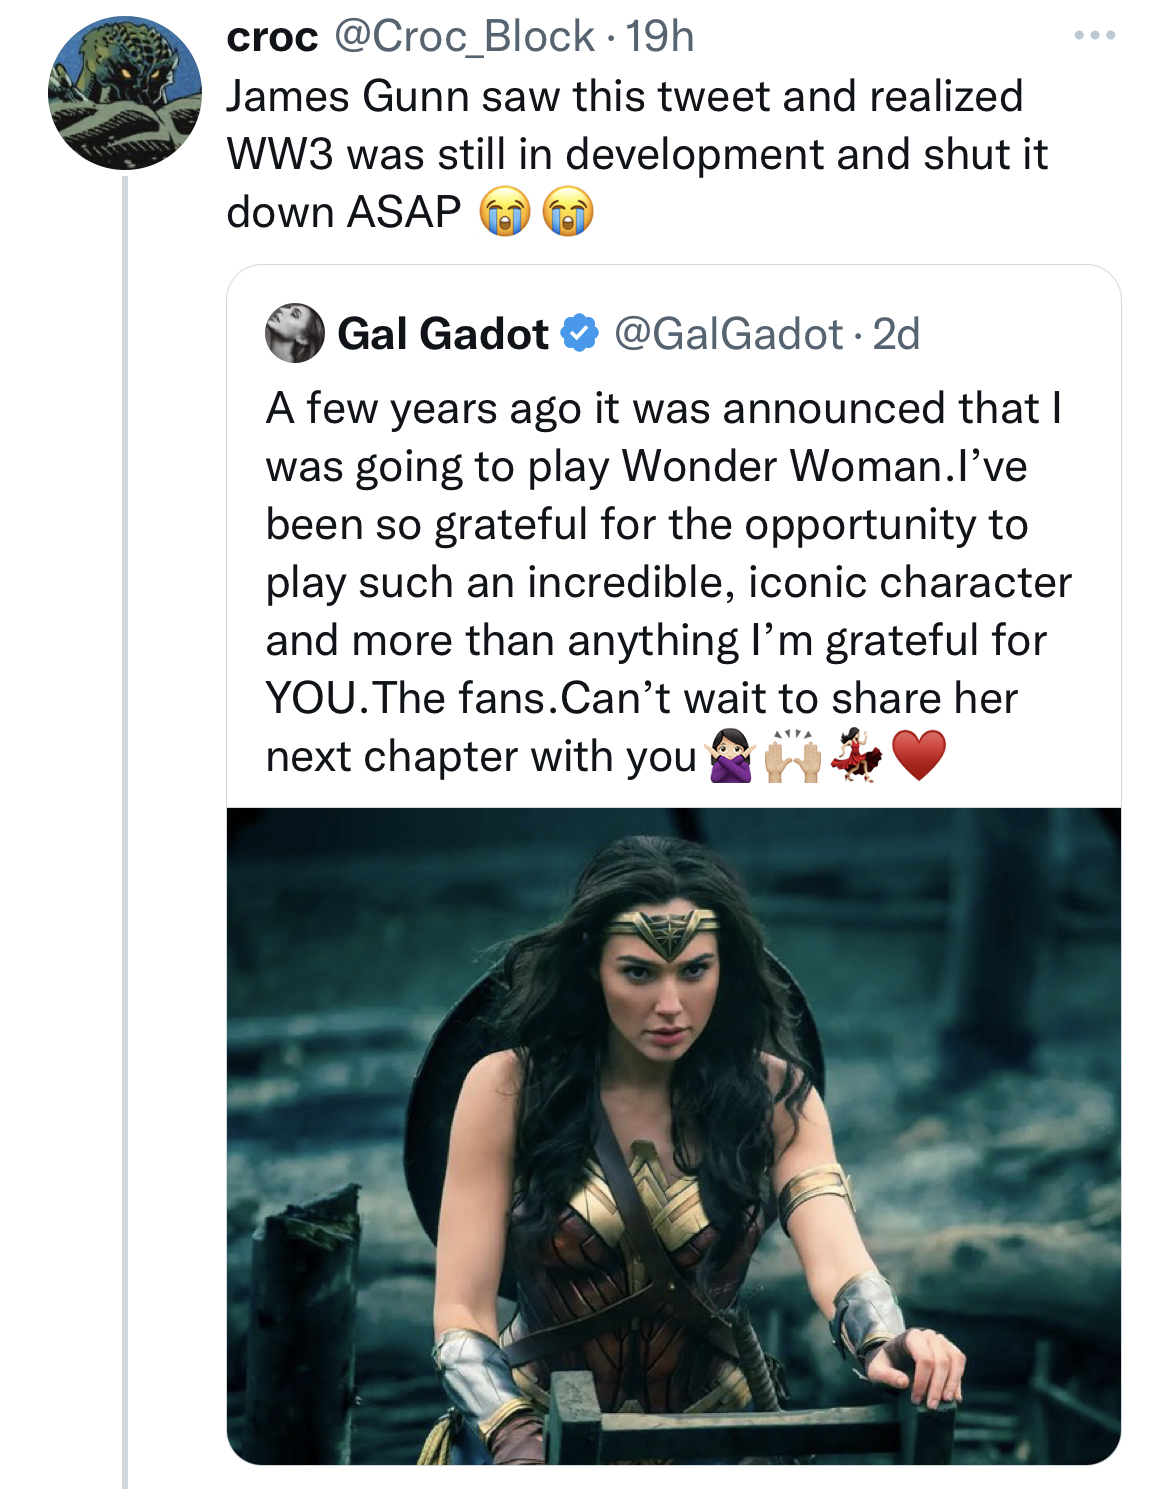 Tweets dunking on celebs - croc Block 19h James Gunn saw this tweet and realized WW3 was still in development and shut it down Asap Gal Gadot Gadot 2d A few years ago it was announced that I was going to play Wonder Woman.I've been so grateful for the opp